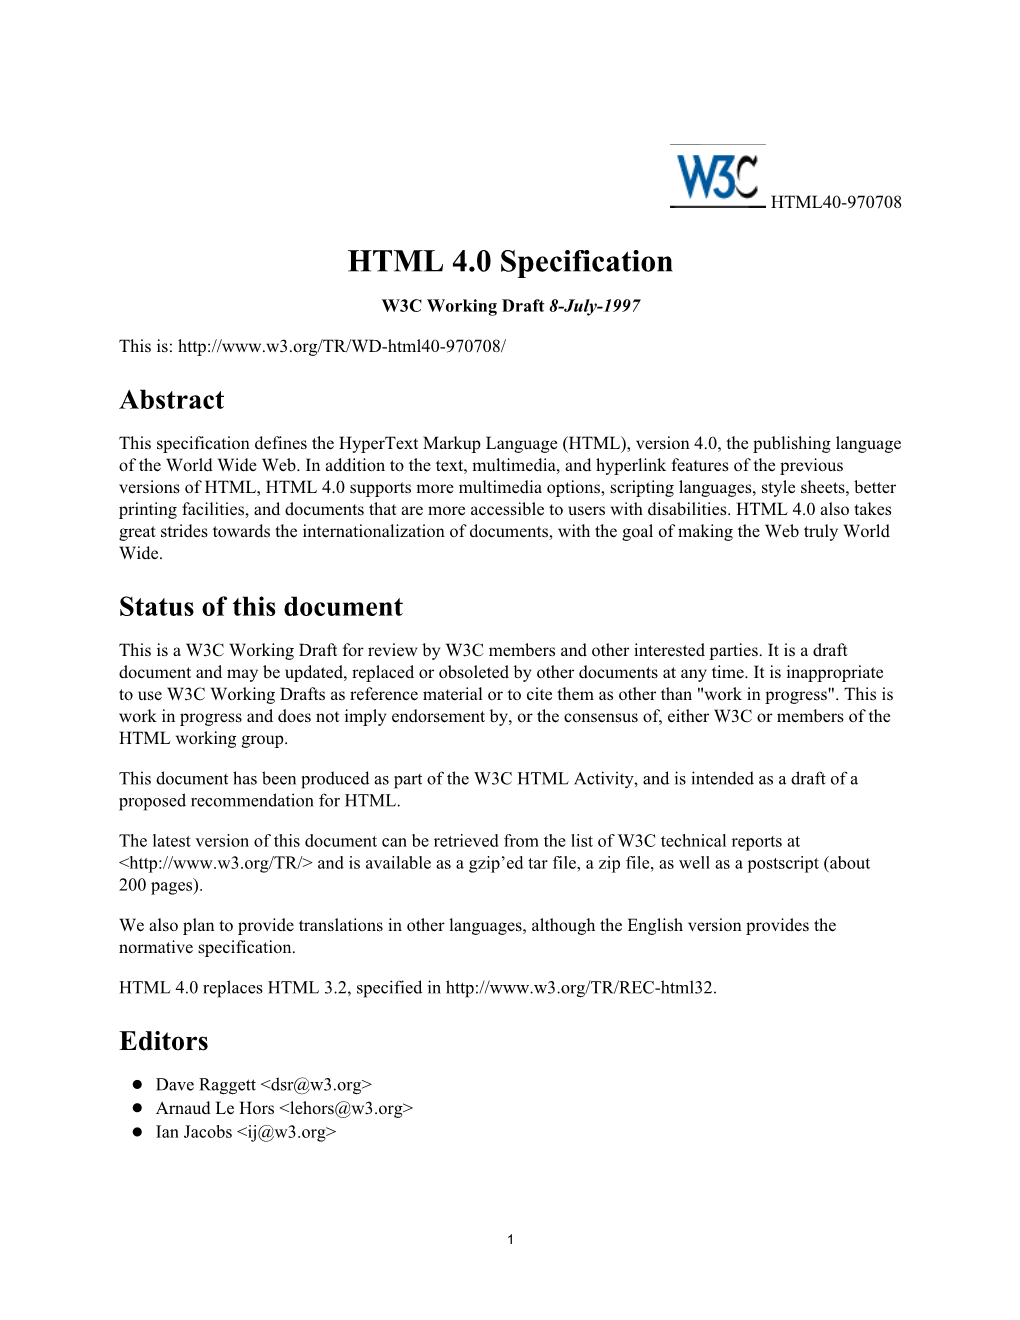 HTML 4.0 Specification